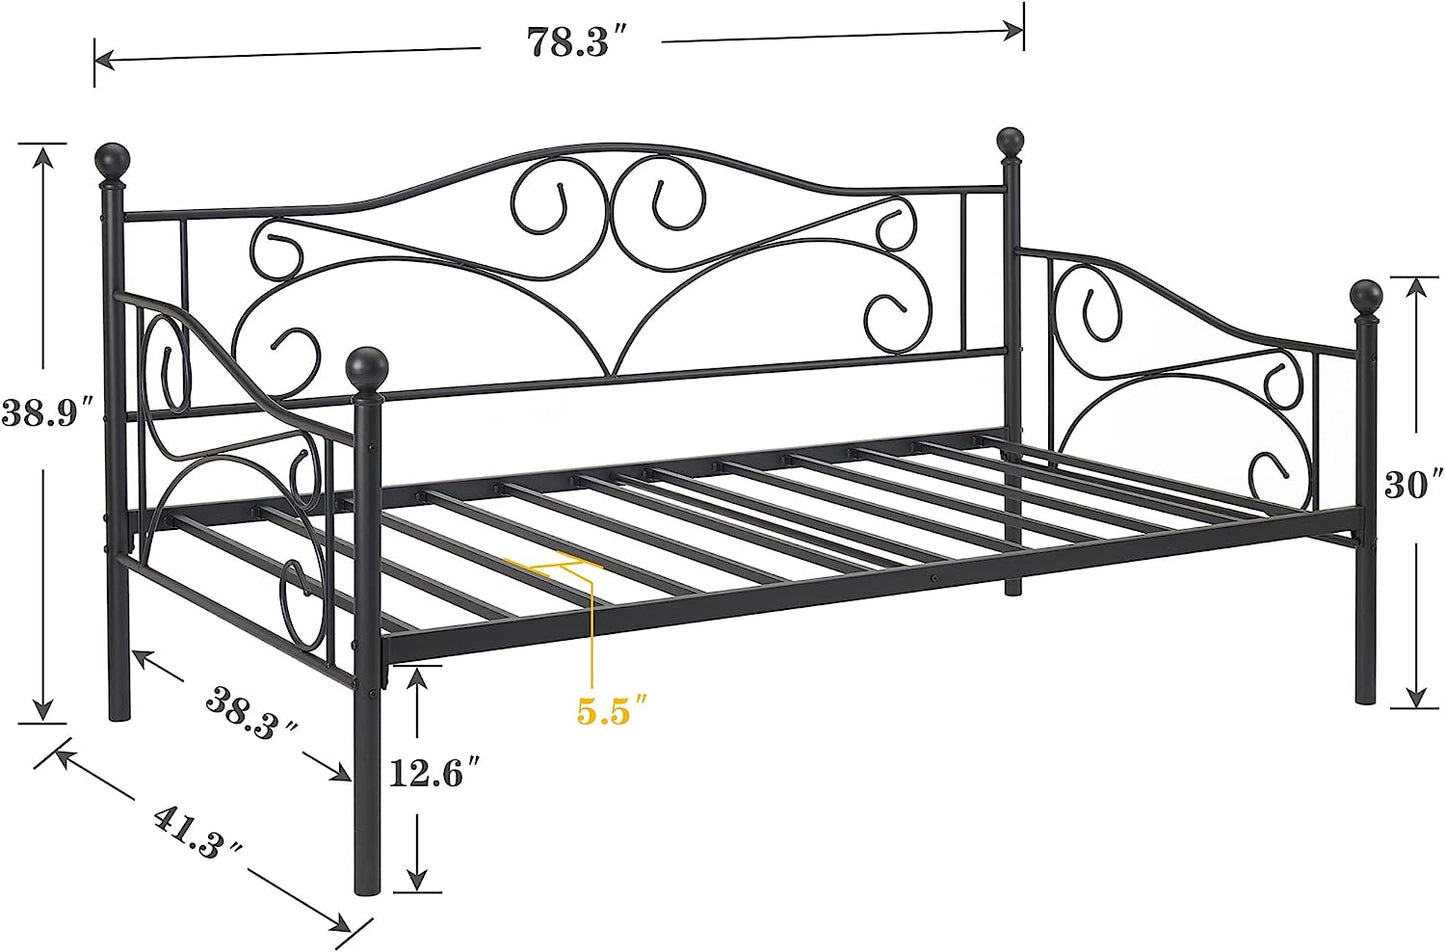 Premium Daybed Metal Bed Frame Twin Size Steel Slat Support, Strong Legs Headboard, Mattress Foundation, Multi-Functional Furniture